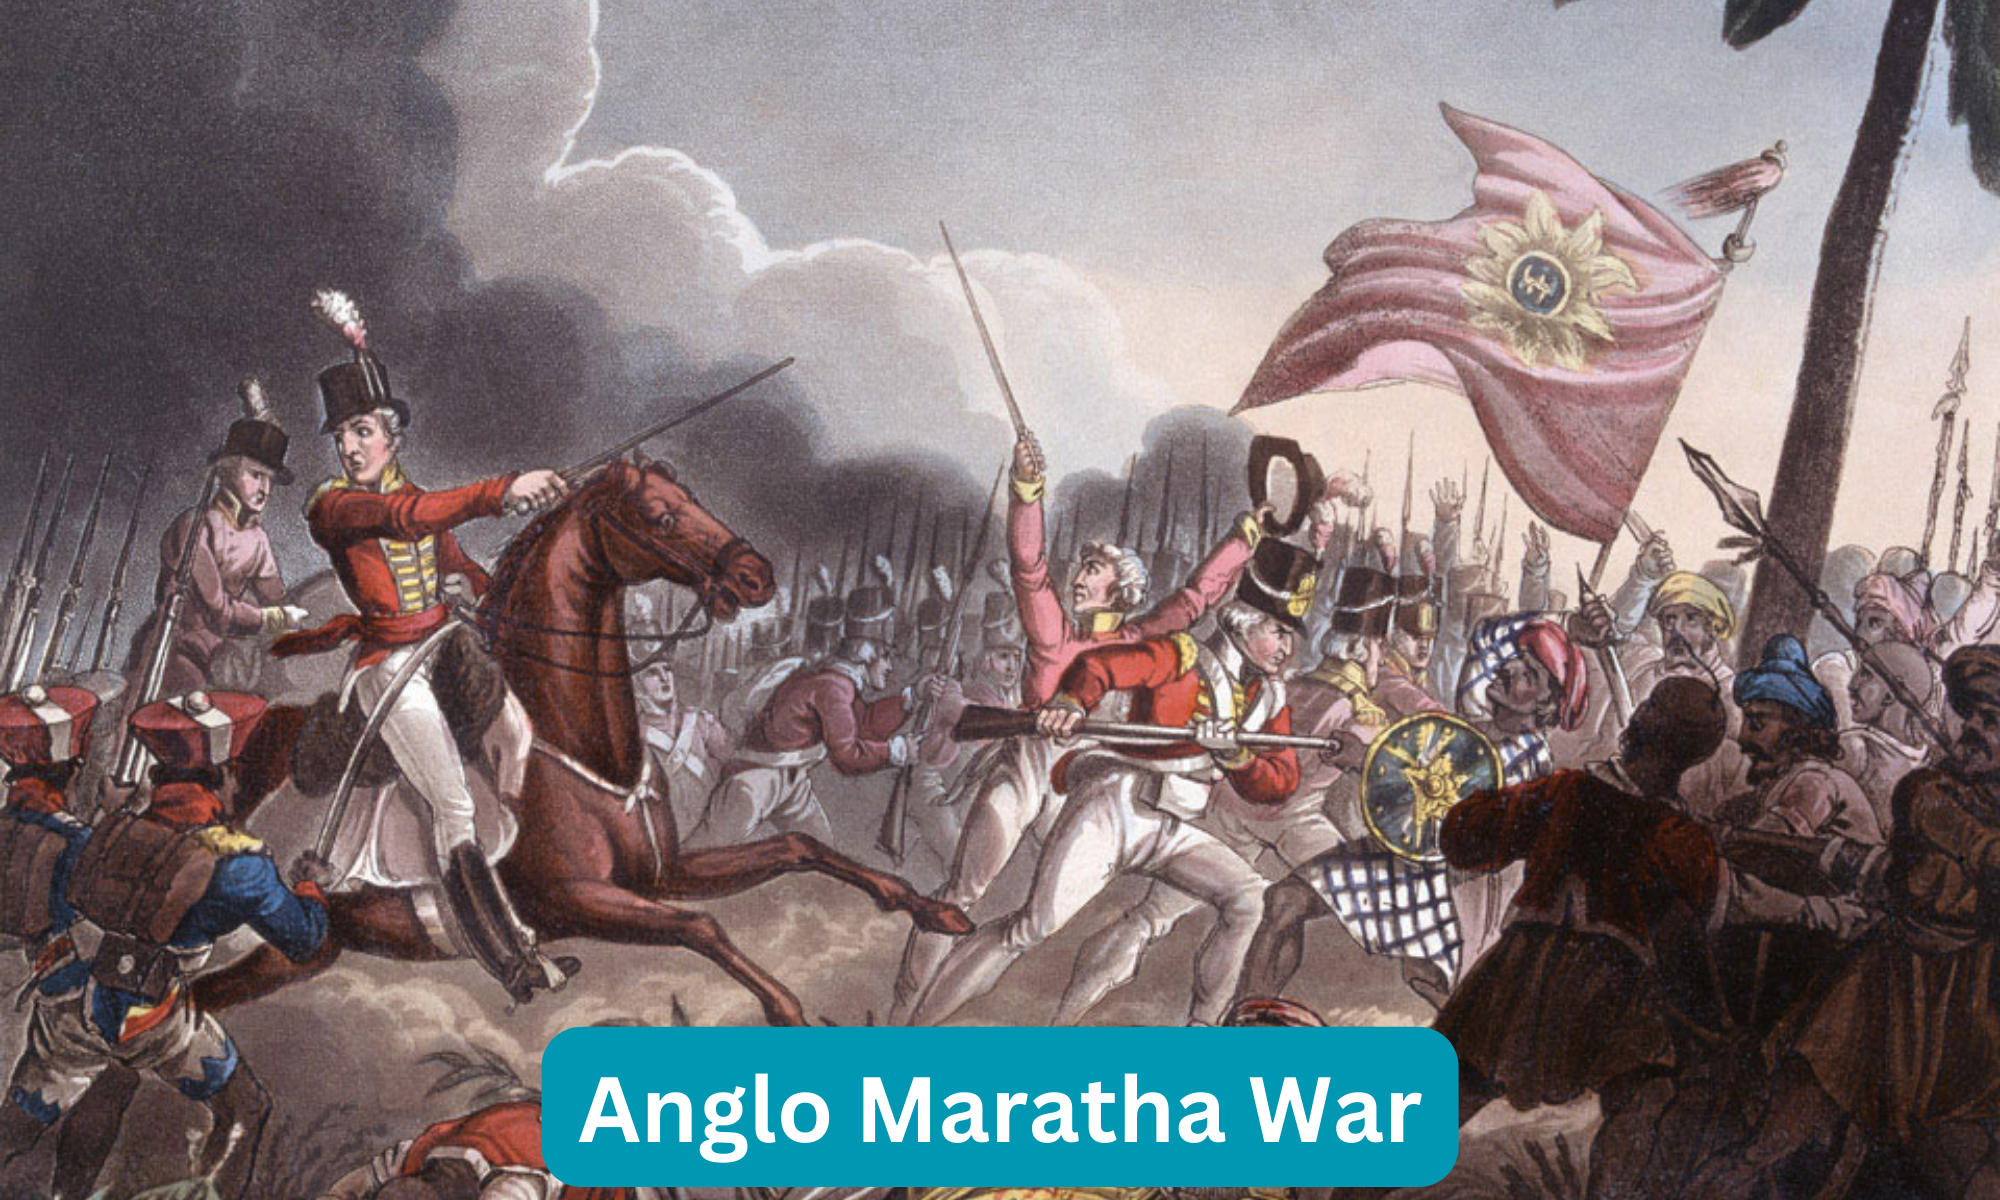 Anglo Maratha War Timeline, Course, Consequence_30.1